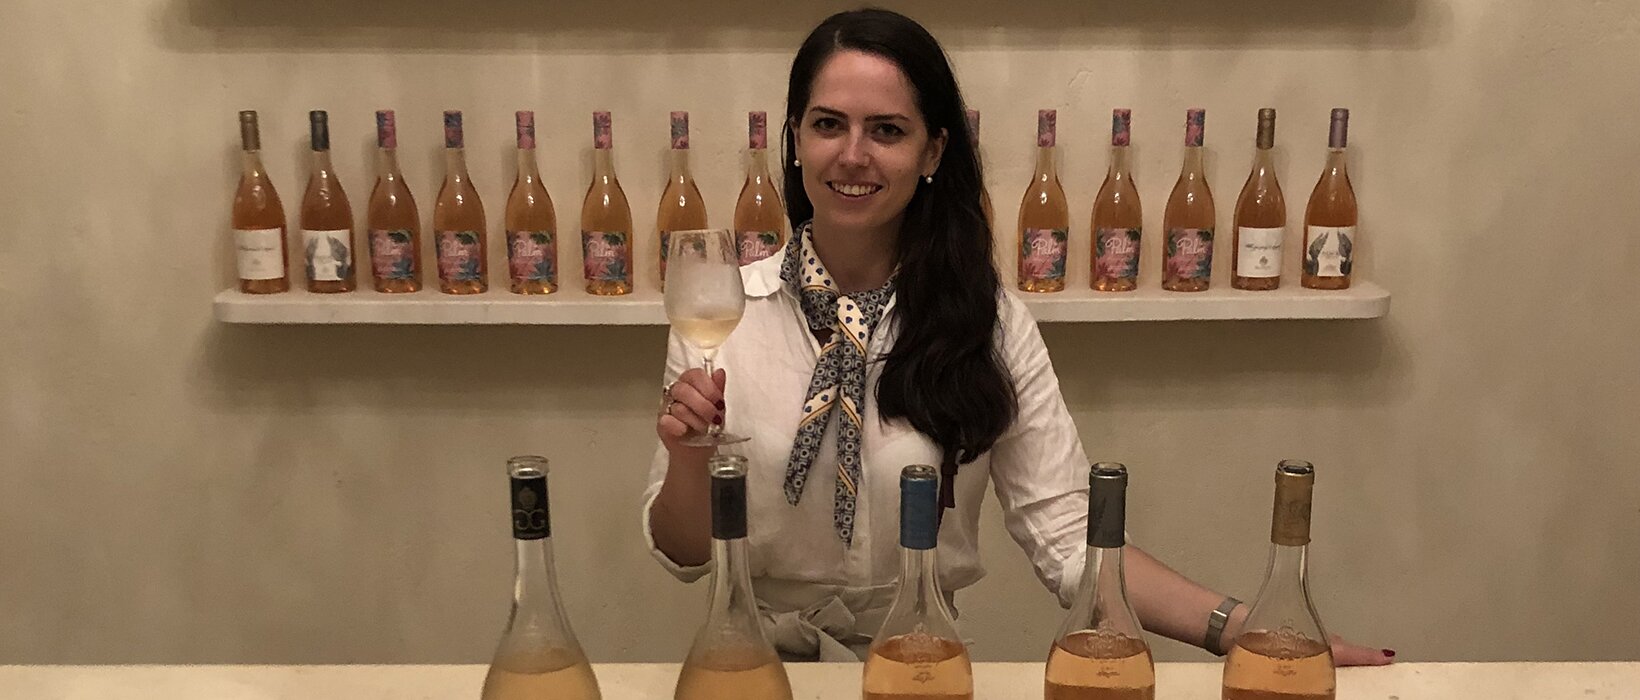 Tasting notes with Emma Denney, assistant head sommelier at the Clove Club